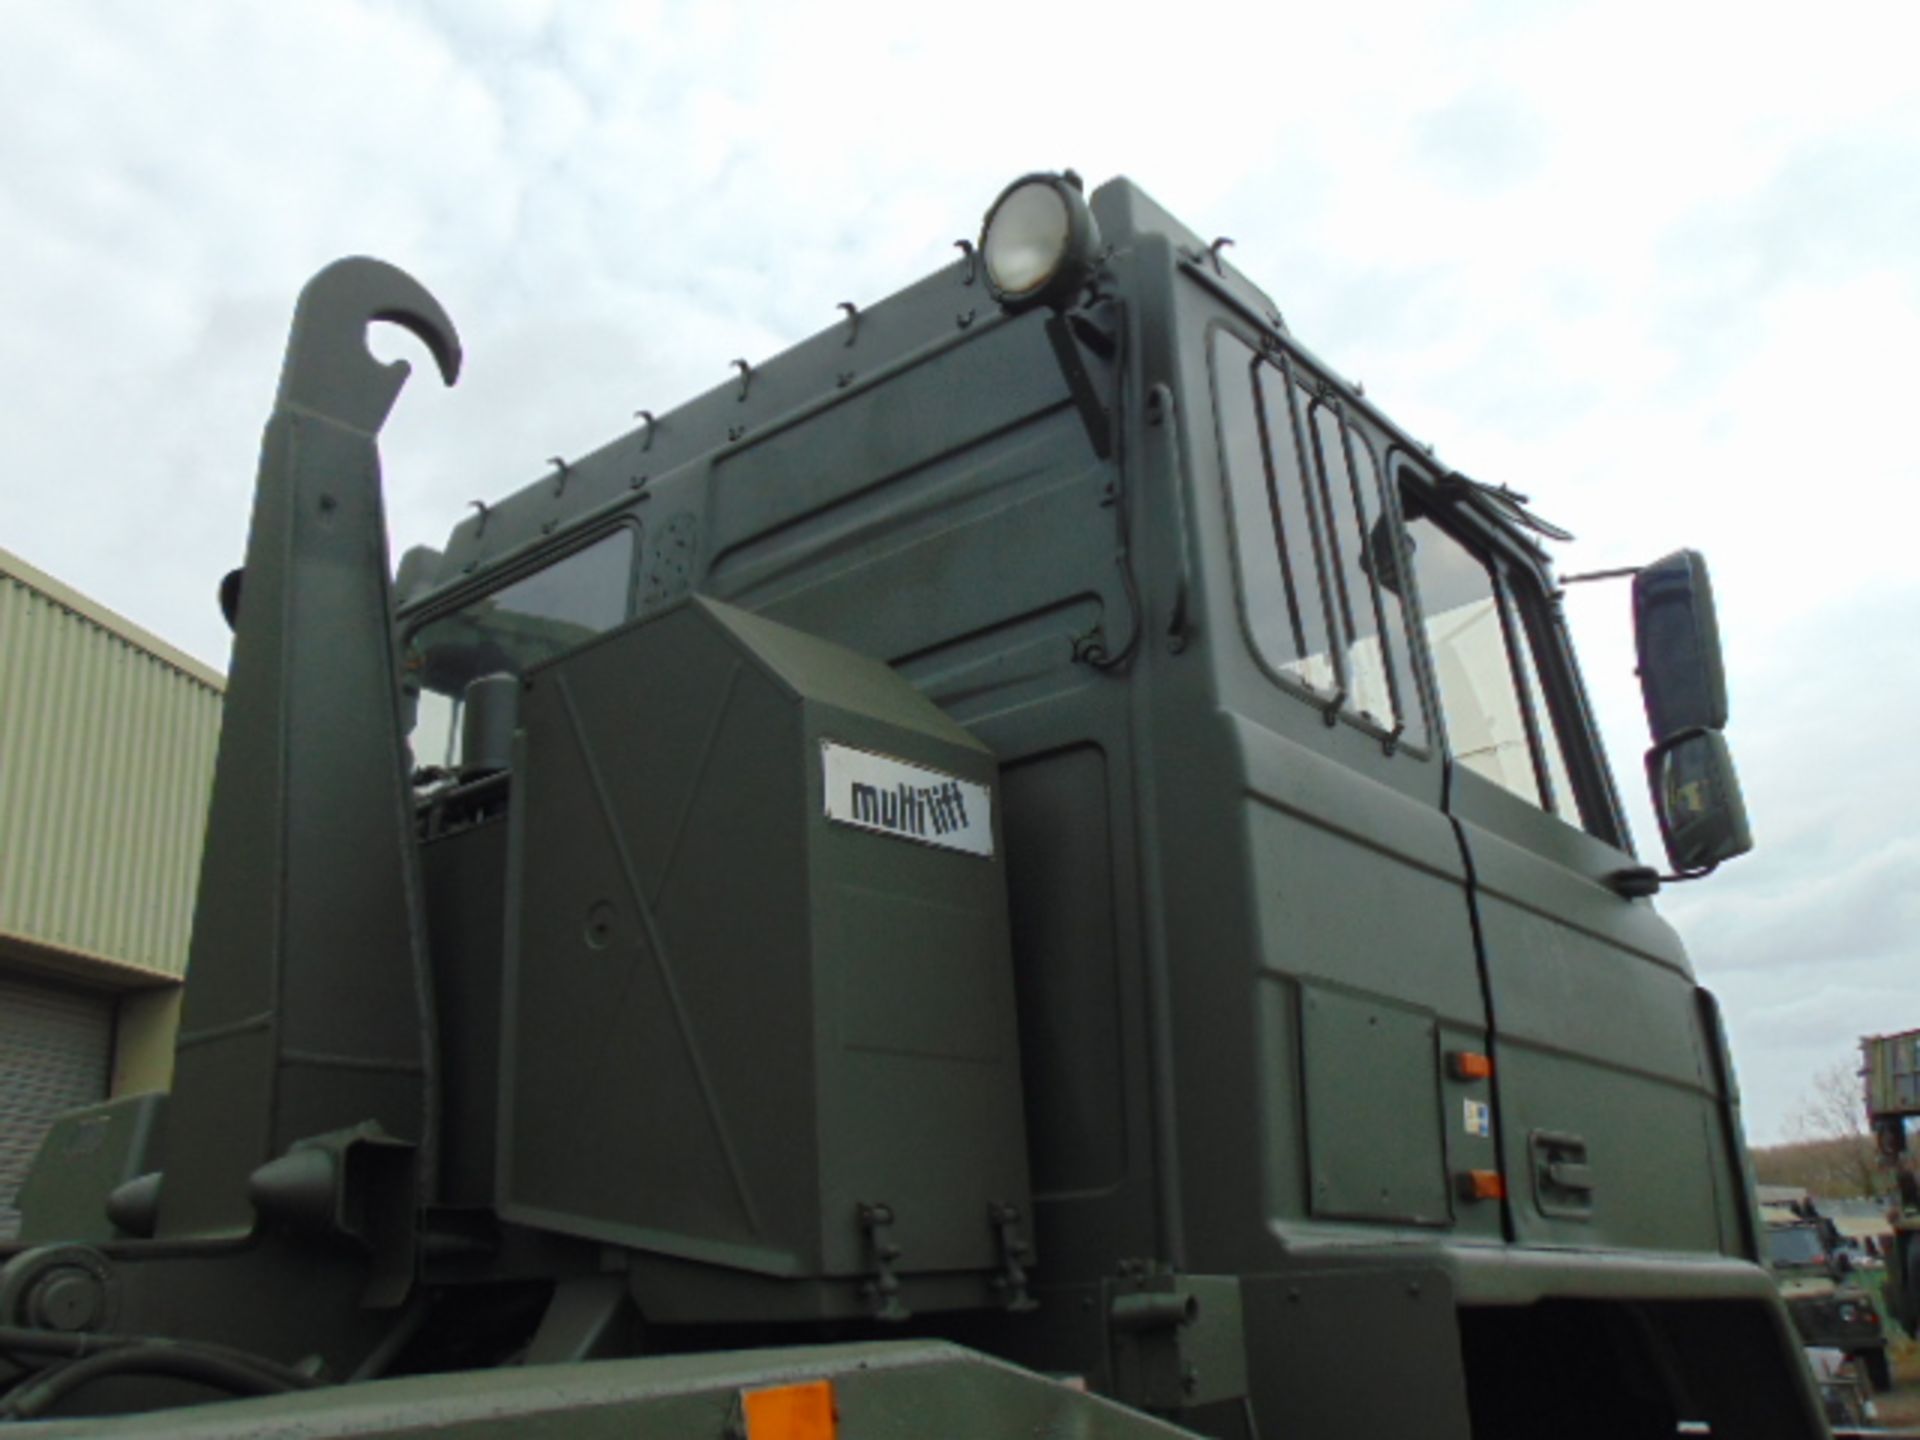 Foden 8x6 DROPS LHD Hook Loader 47,000 Kms only Ex Reserve - Image 15 of 39